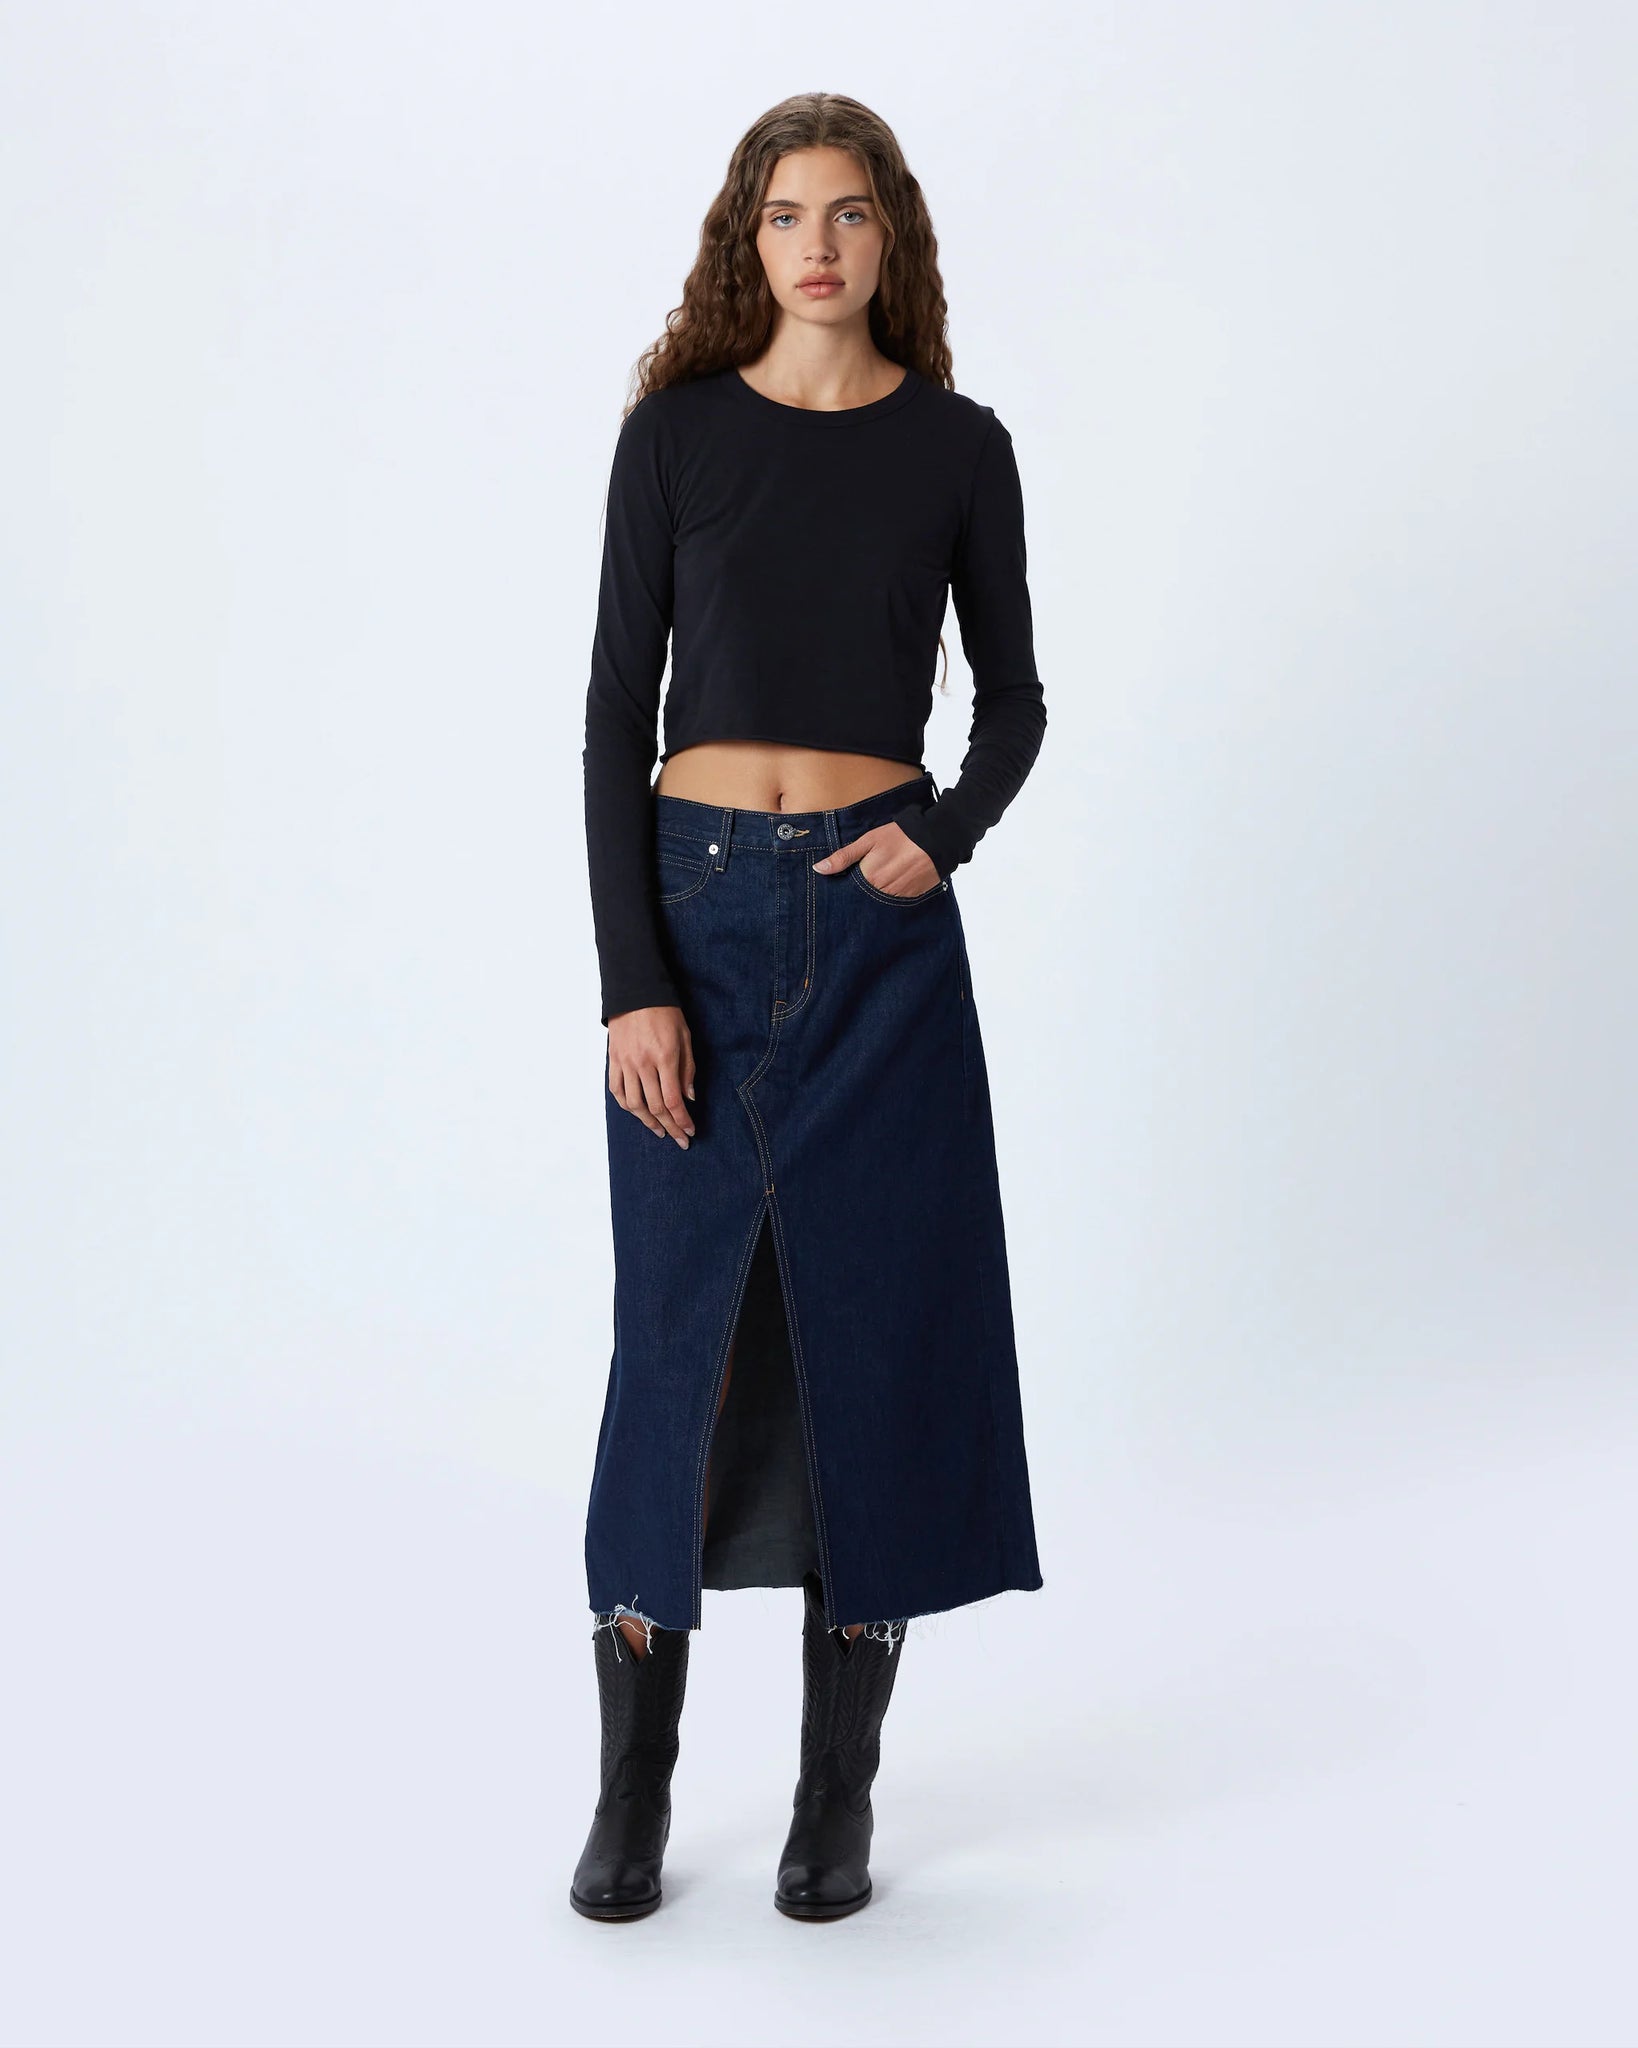 Mid Rise Skirt in Midnight Mile